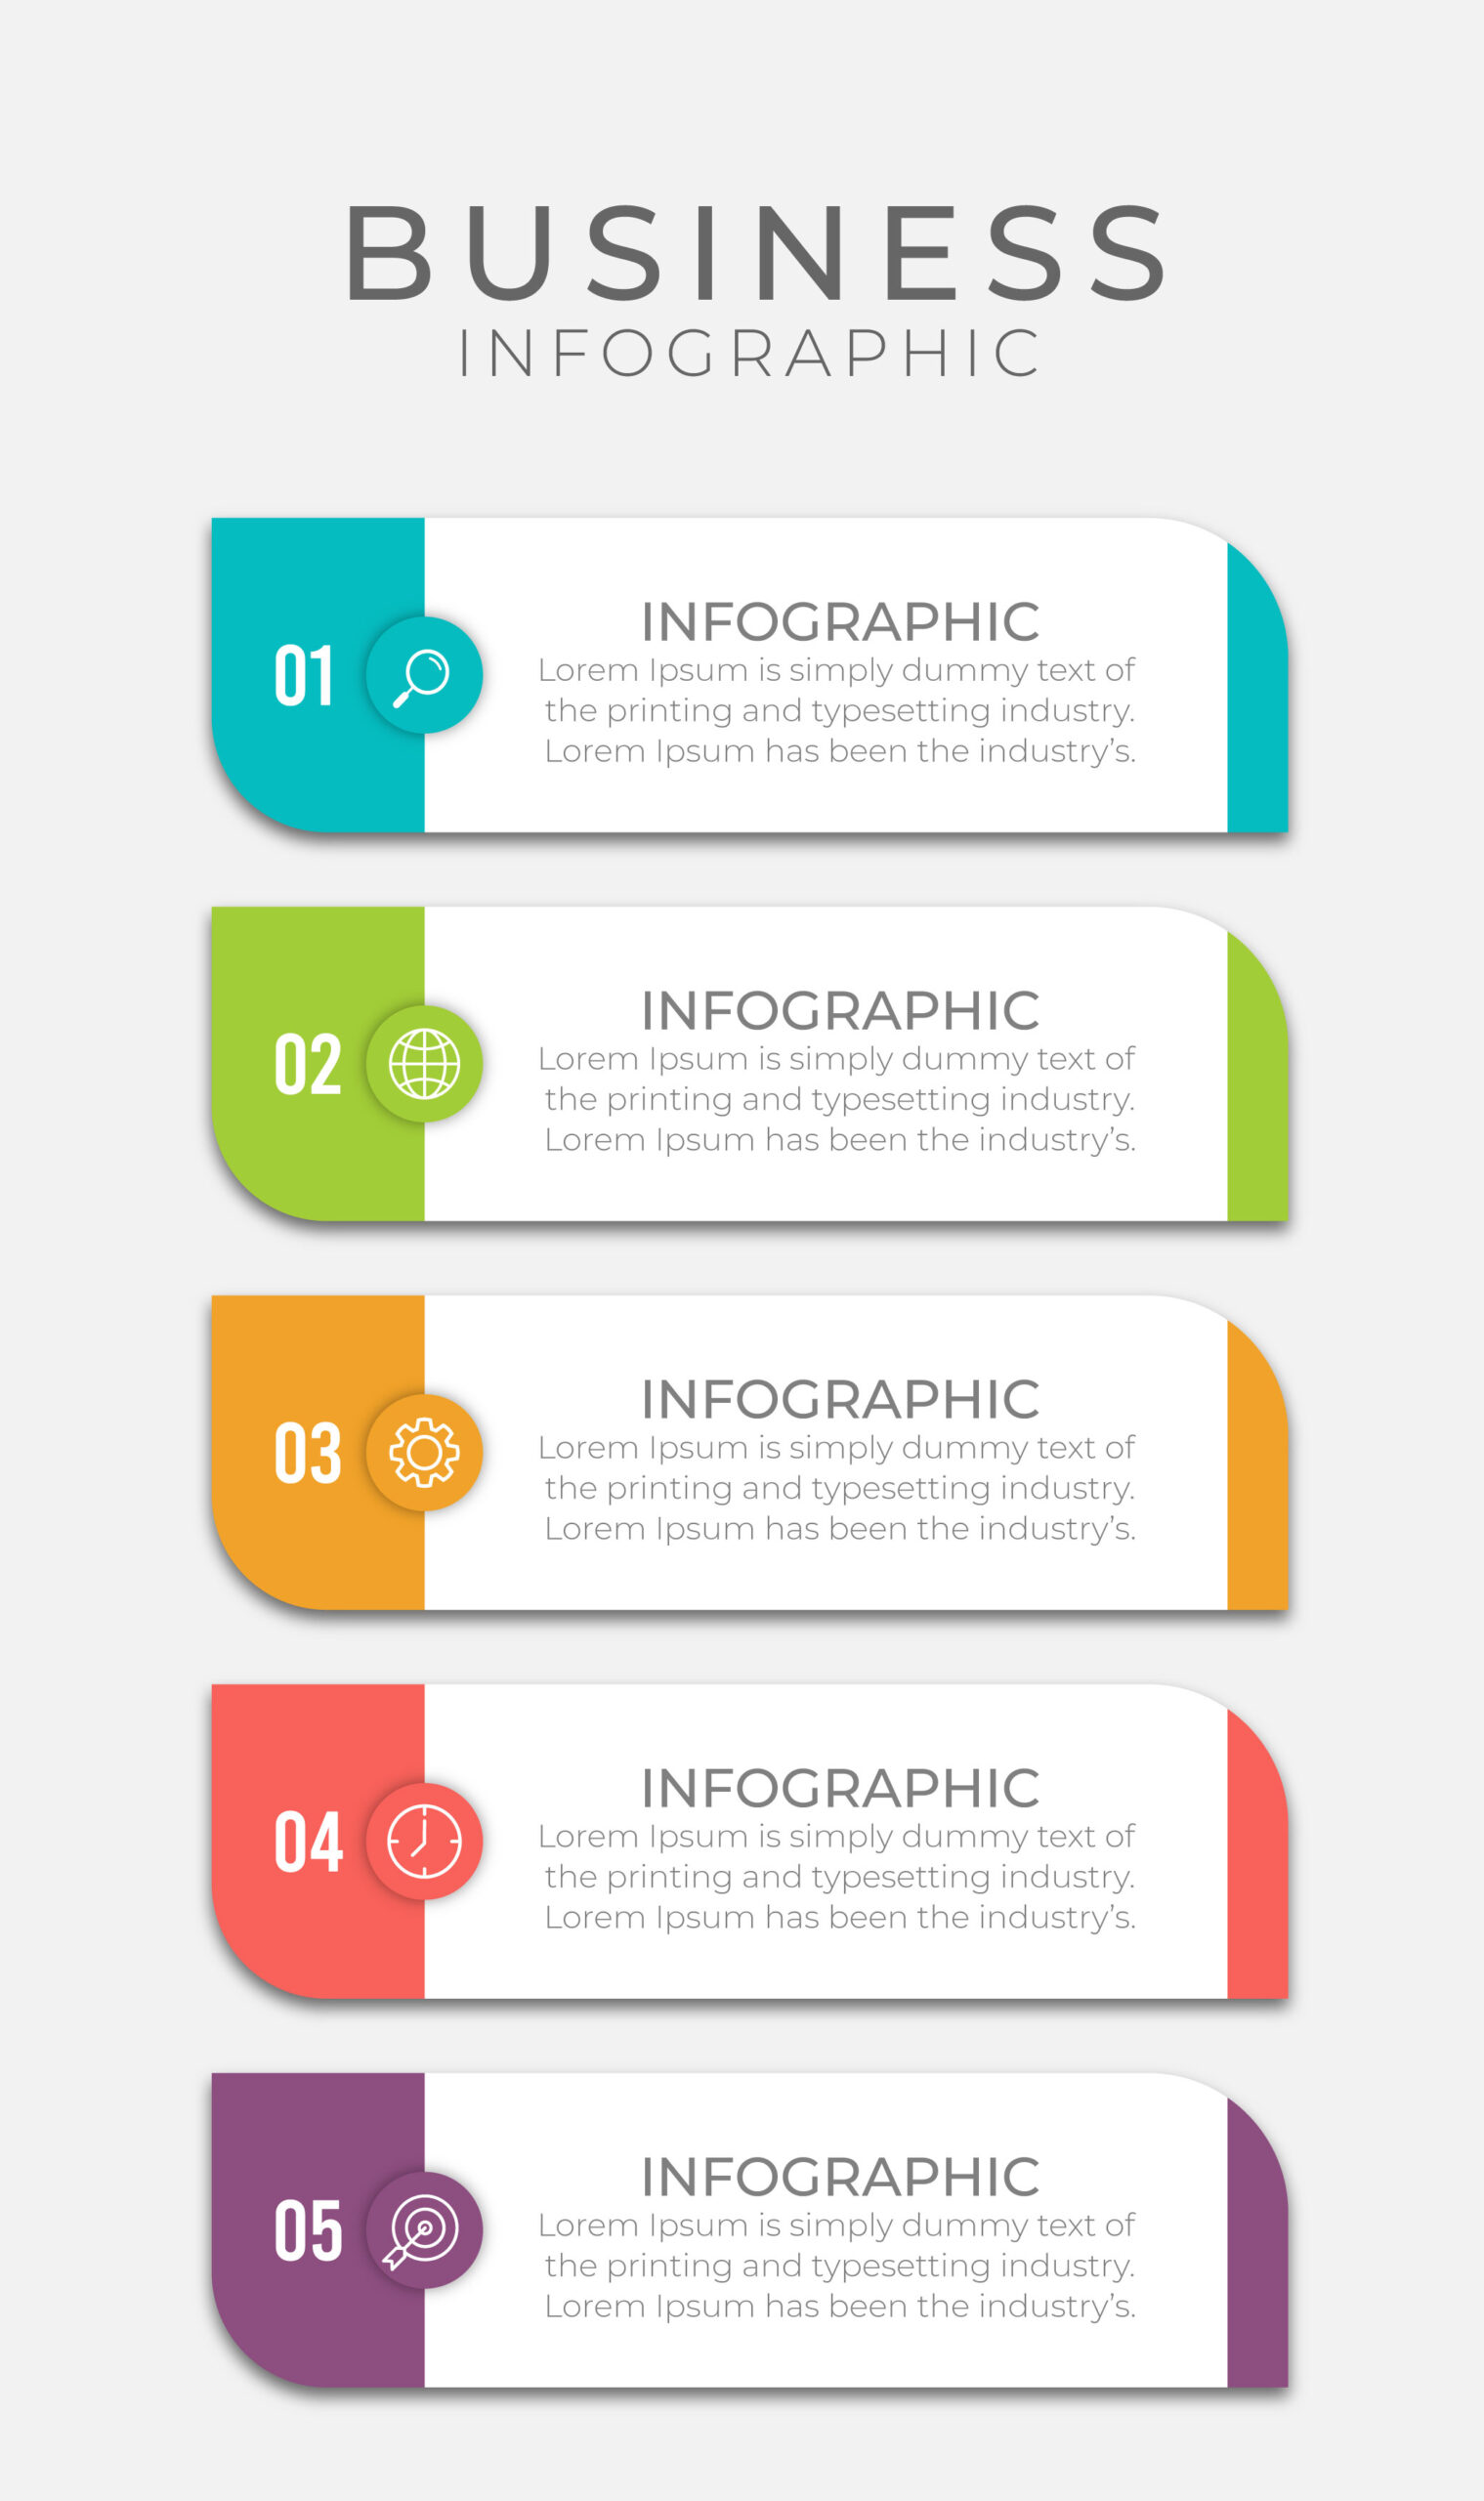 50 Free Infographic Submission Sites List 2020 | SEO Knowledge - SEO Knowledge | Service